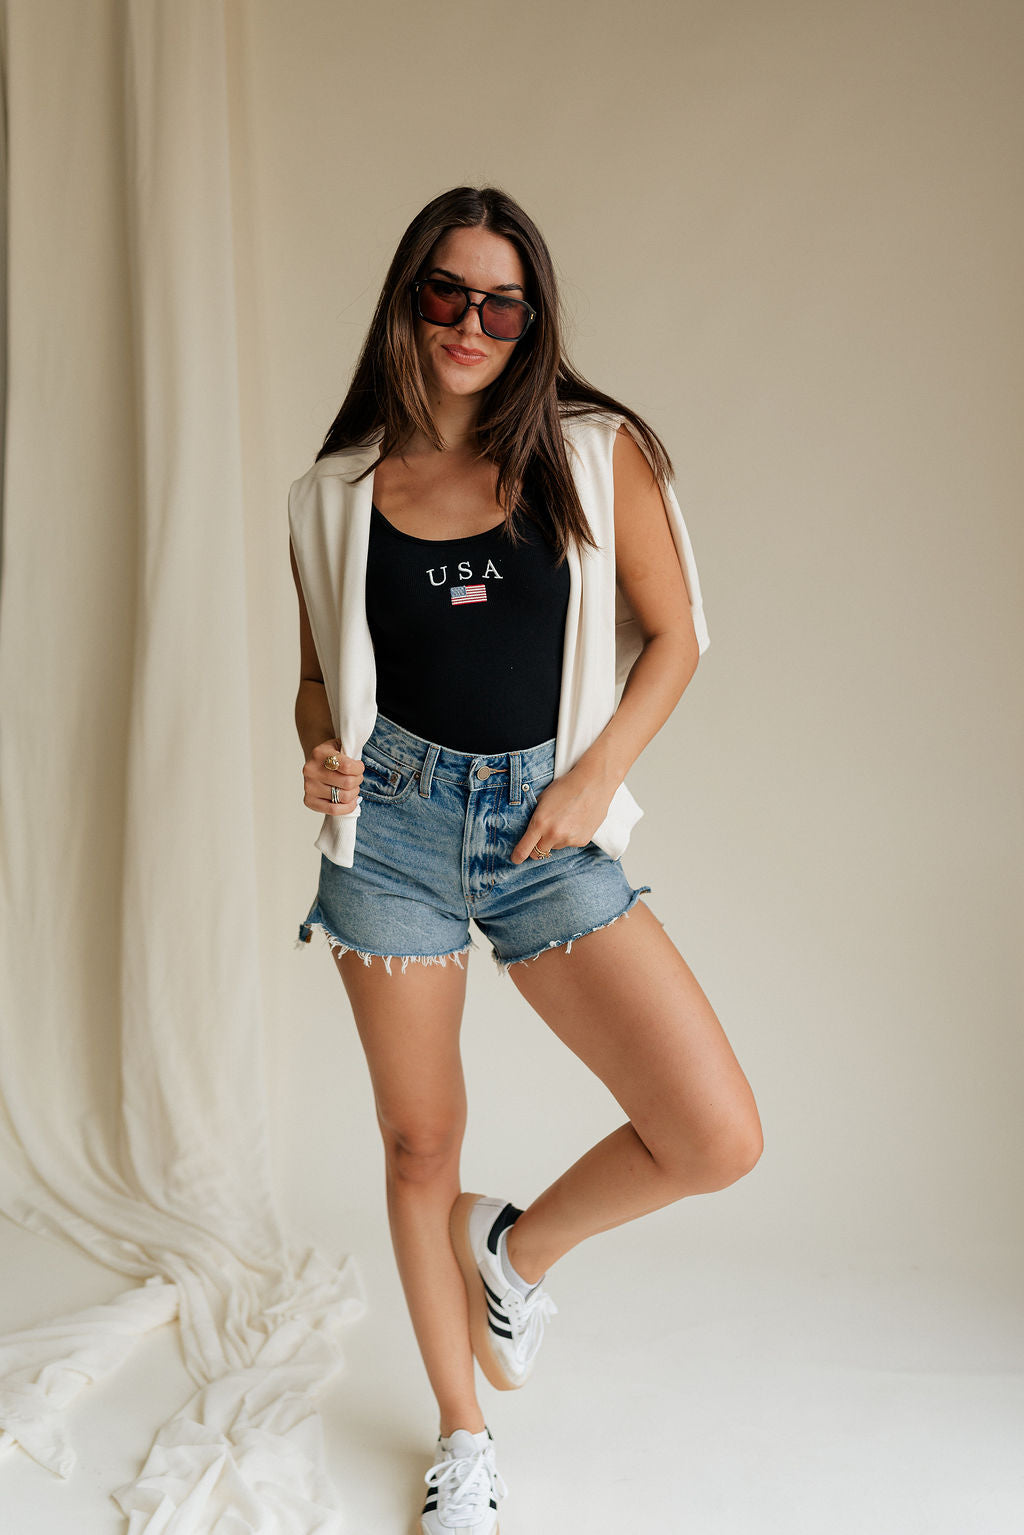 Full body front view of female model wearing the USA Black Ribbed Sleeveless Bodysuit that has black ribbed fabric, USA in white text above a flag graphic, and a scoop neck. Styled with ivory sweatshirt around shoulders and denim shorts.